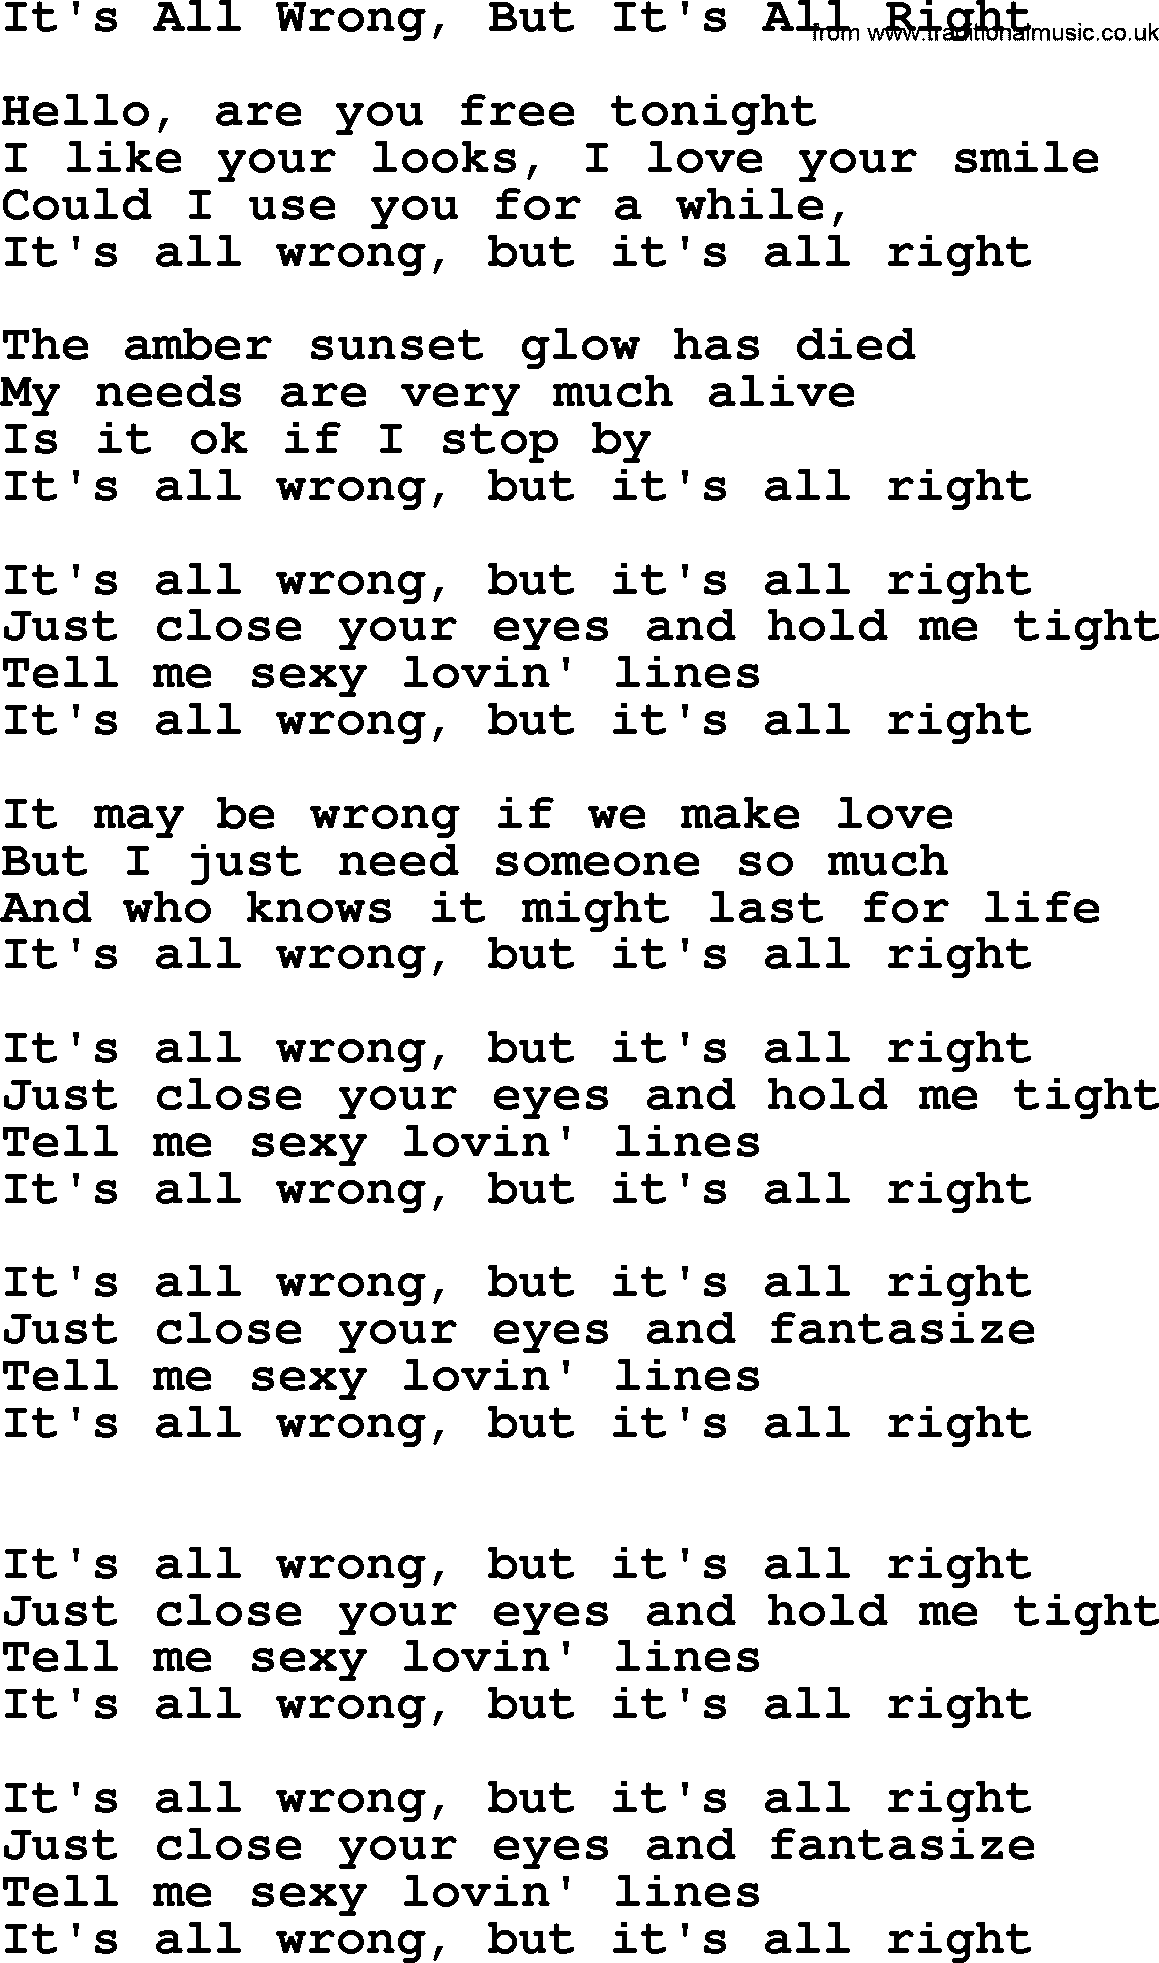 Dolly Parton song It's All Wrong, But It's All Right.txt lyrics